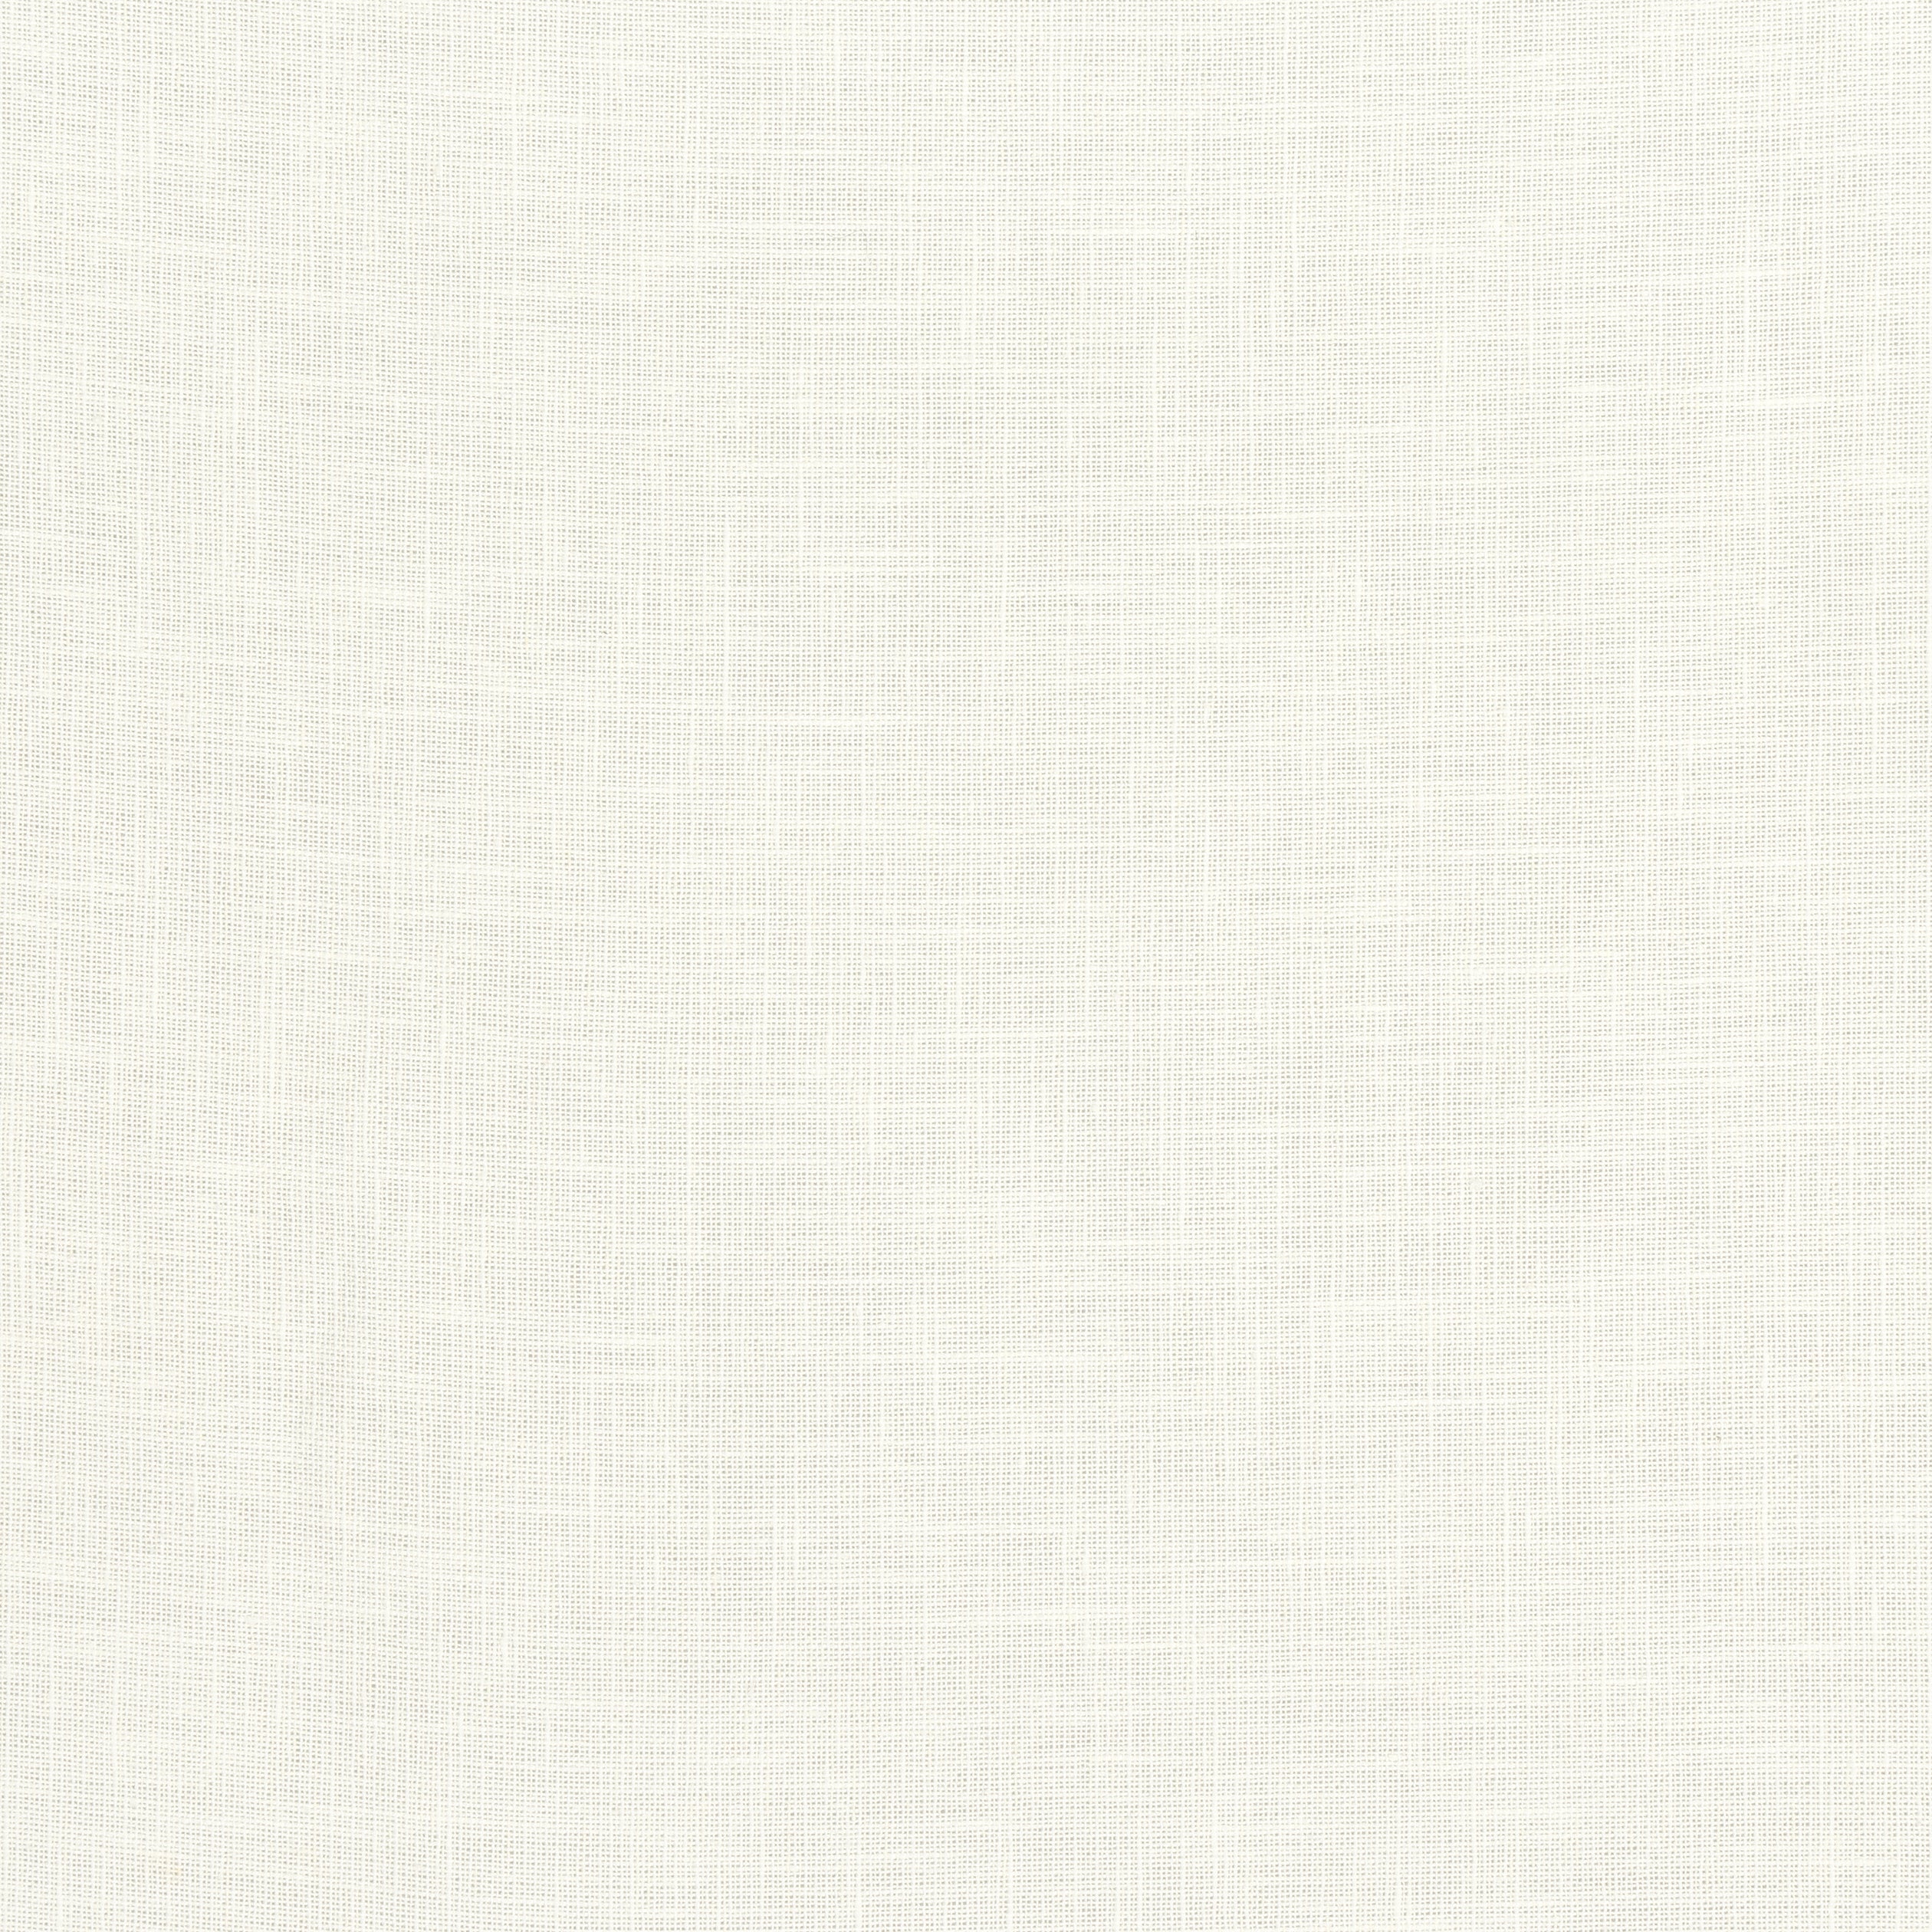 Ottawa fabric in ivory color - pattern number FWW8244 - by Thibaut in the Aura collection